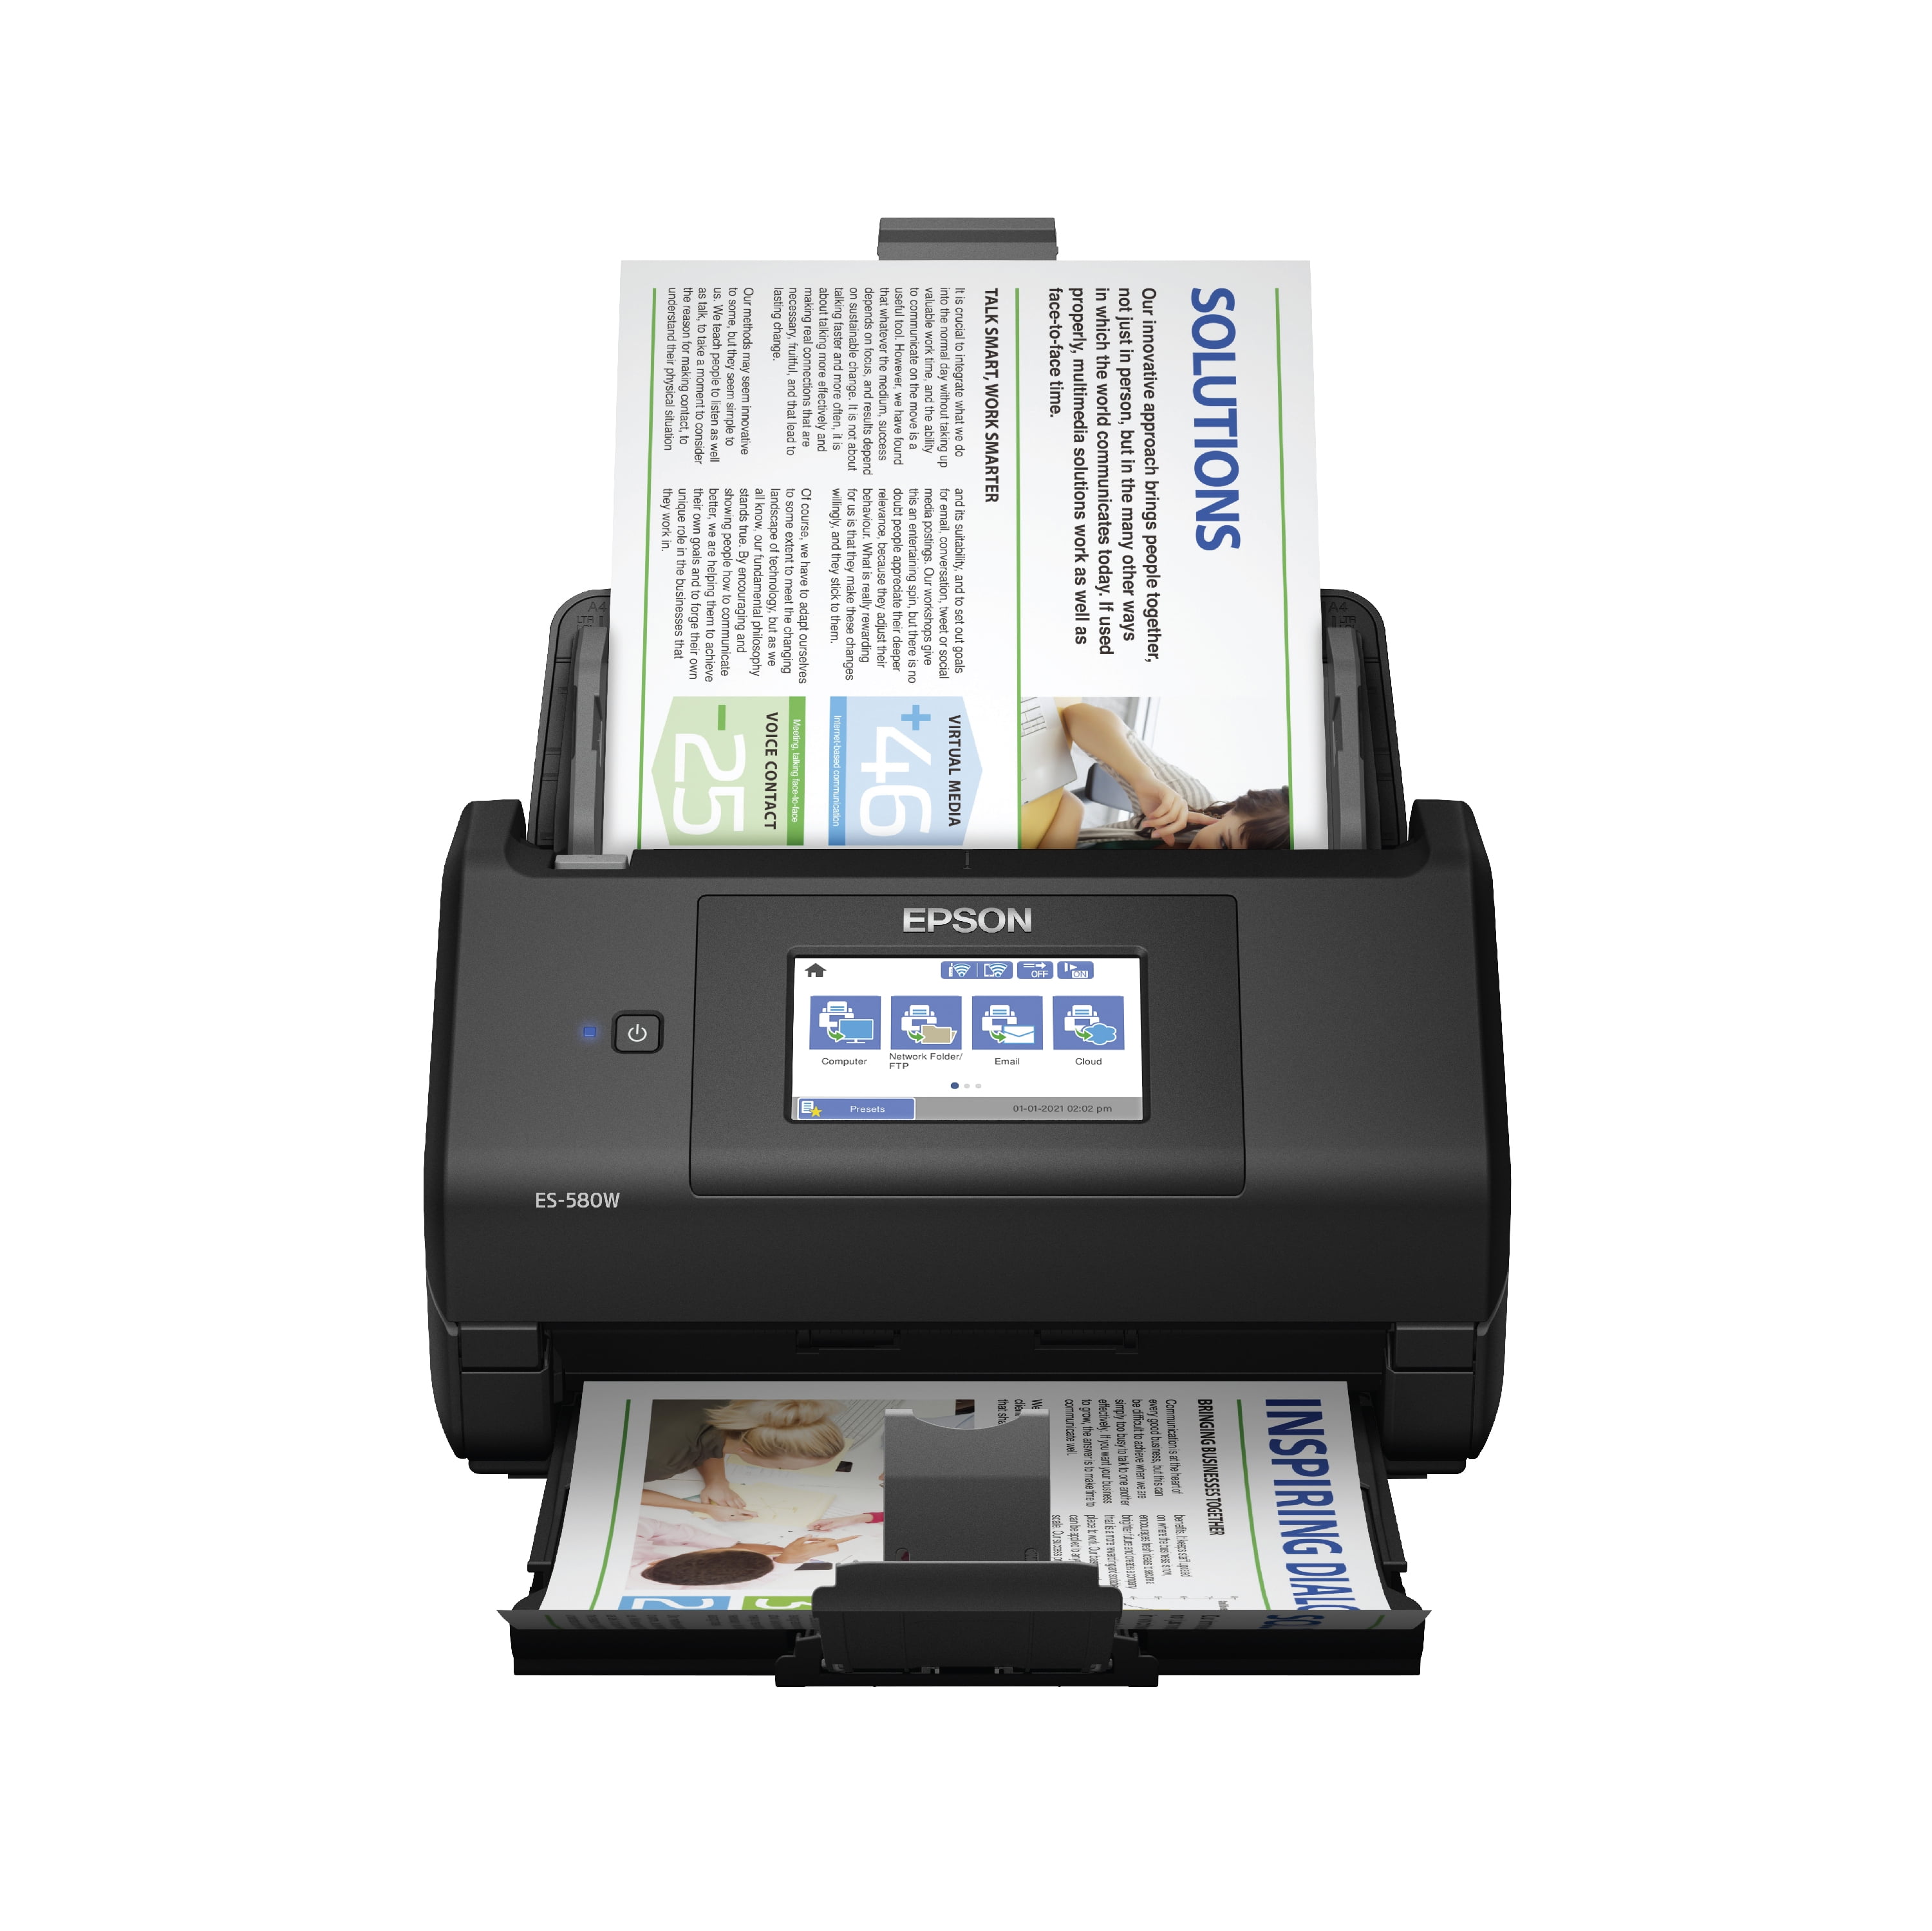 Auto Document Feeder ADF Epson Workforce ES-500WR Wireless Color Receipt & Document Scanner for PC and Mac 